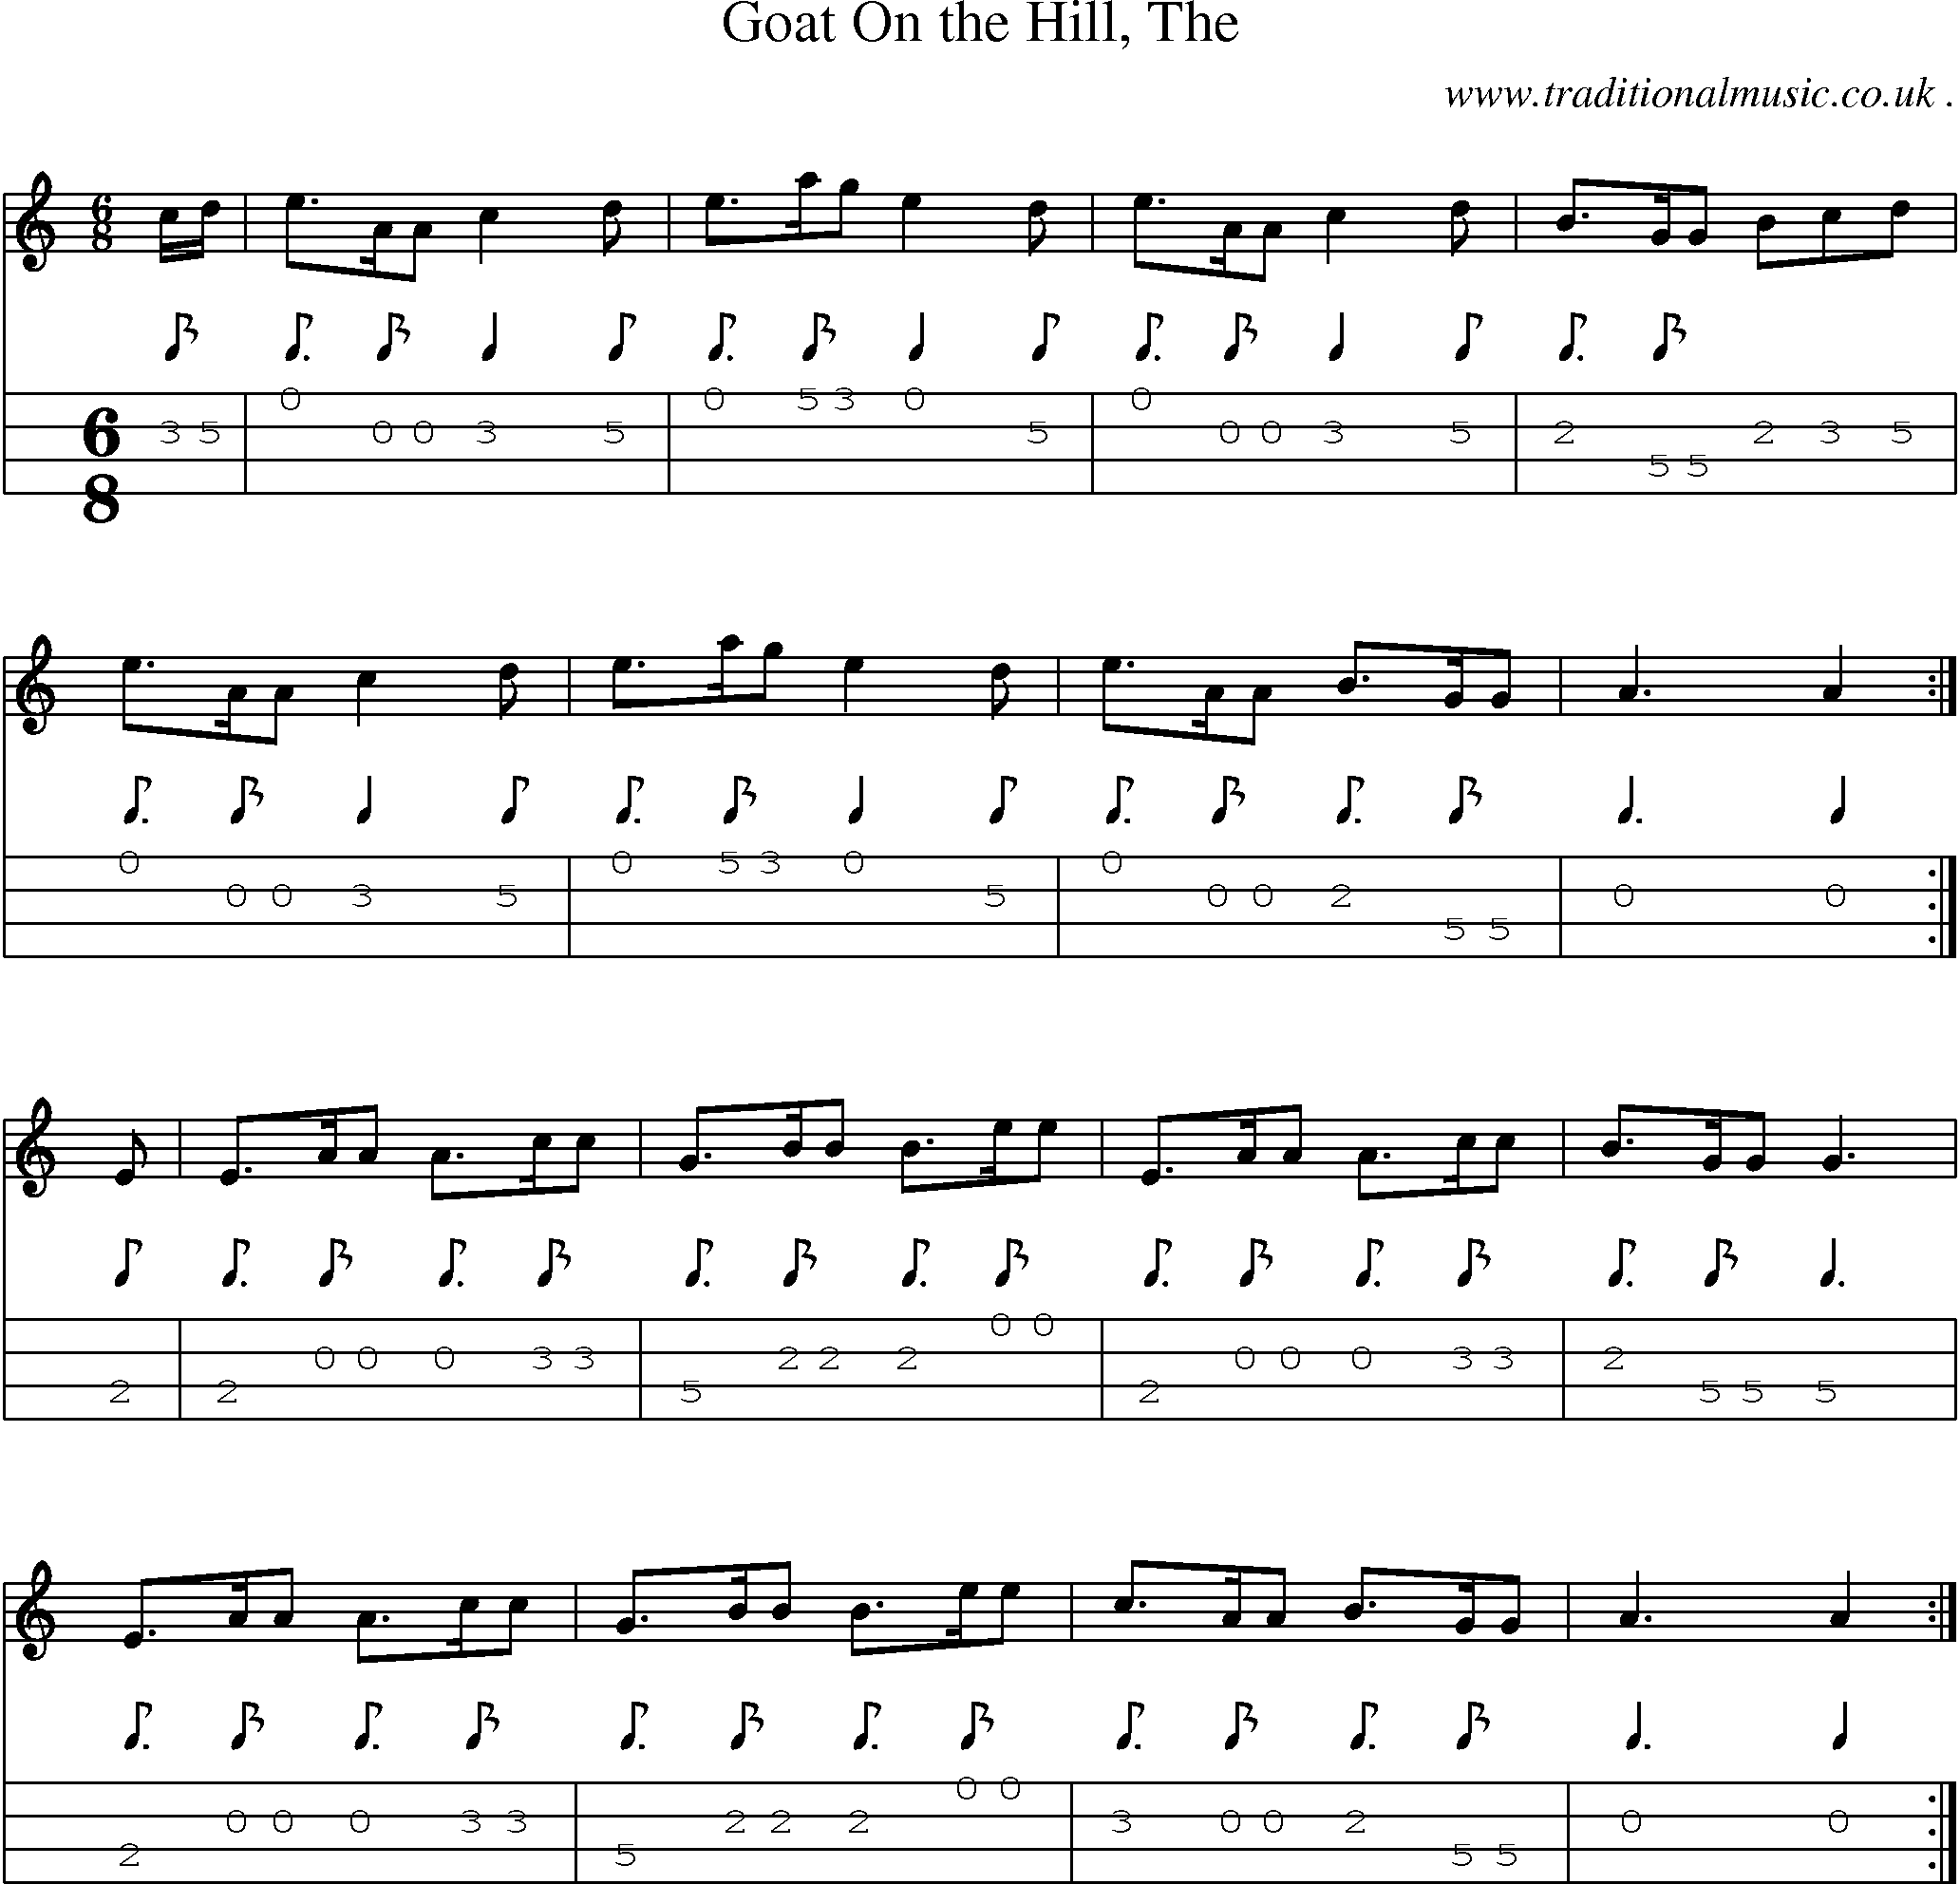 Sheet-music  score, Chords and Mandolin Tabs for Goat On The Hill The